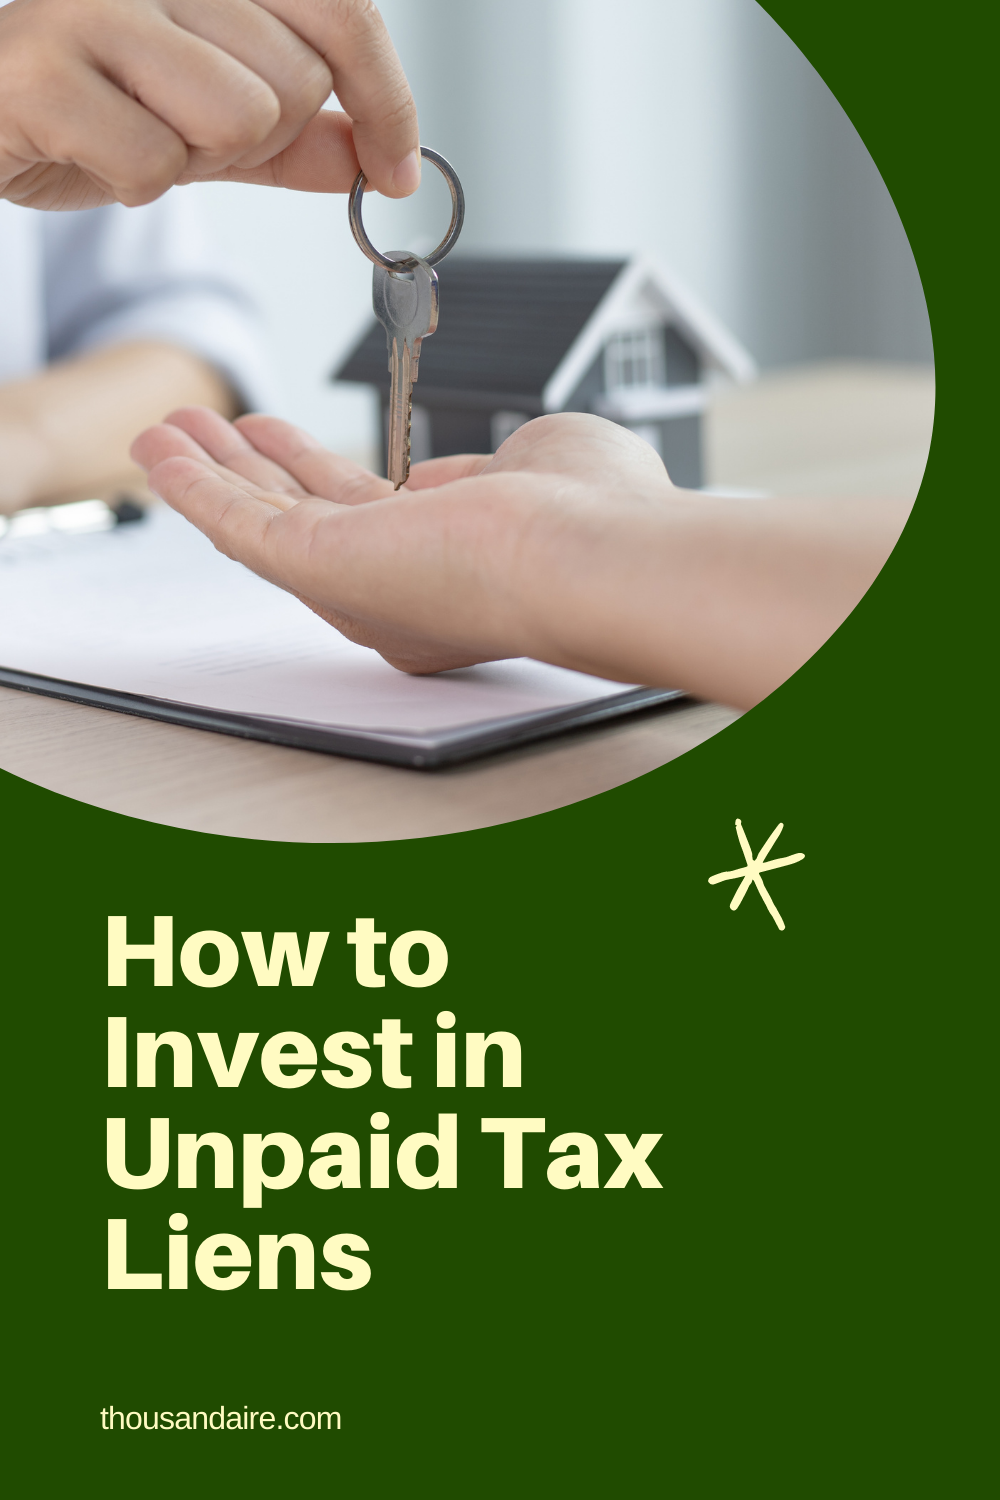 How to Invest in Unpaid Tax Liens